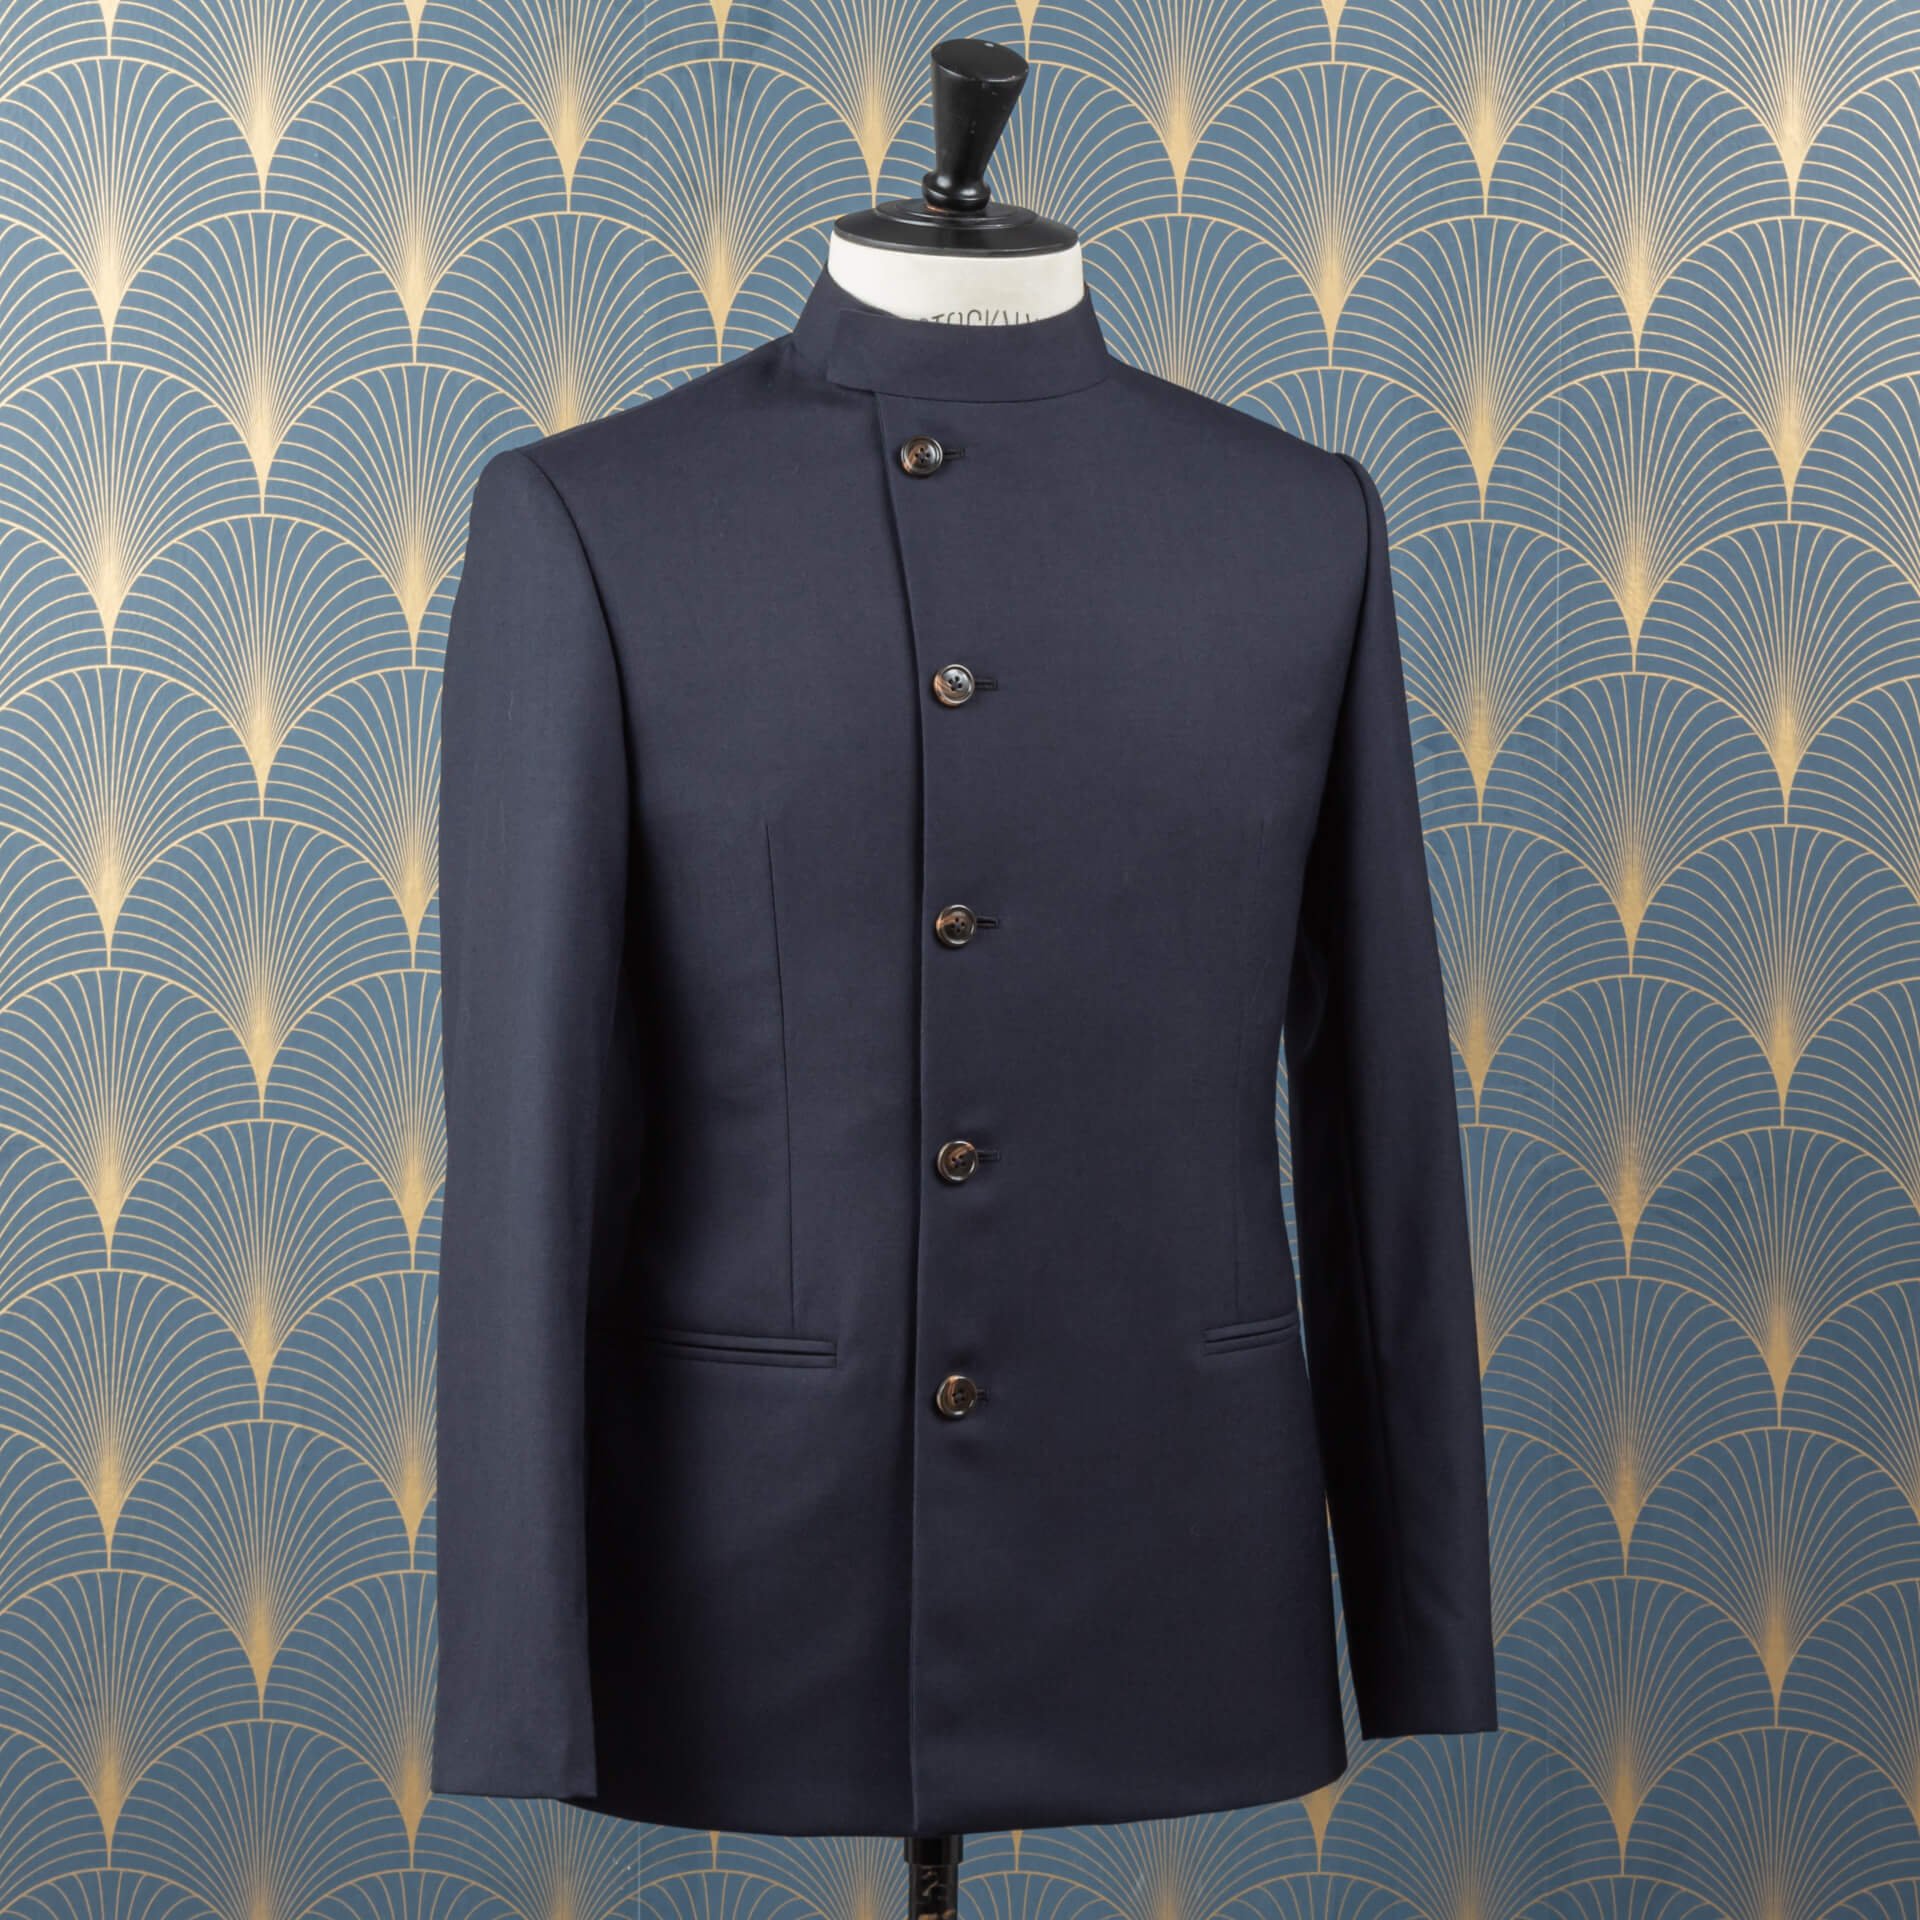 Orchestra Attire Bespoke Jacket with stand up collar side view